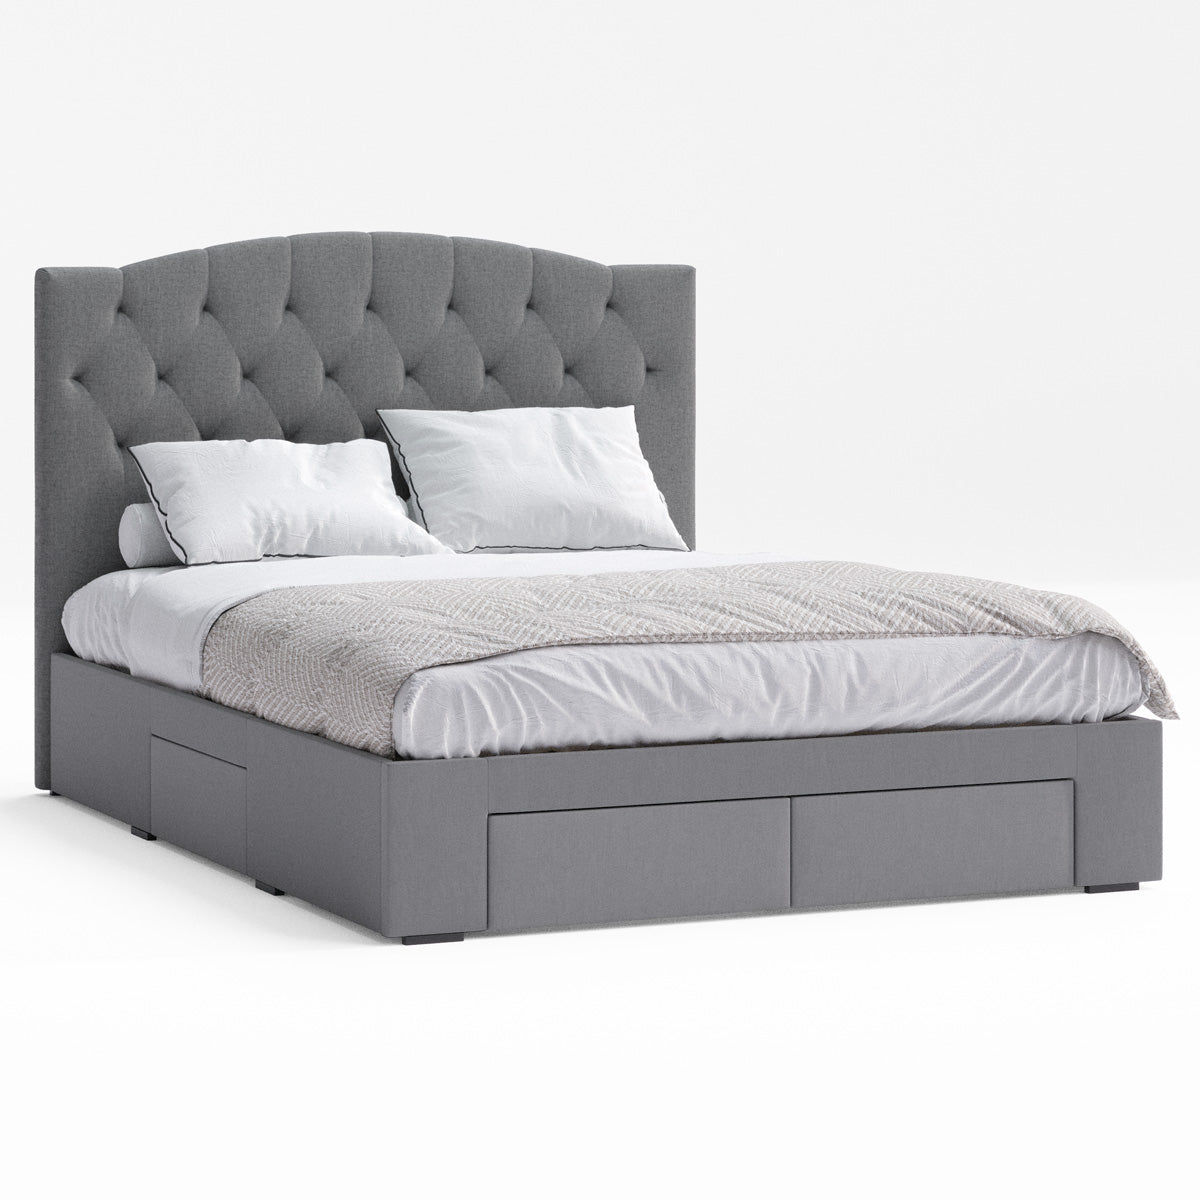 Charlotte Curved Bed Frame with Four Storage Drawers (Charcoal Fabric)